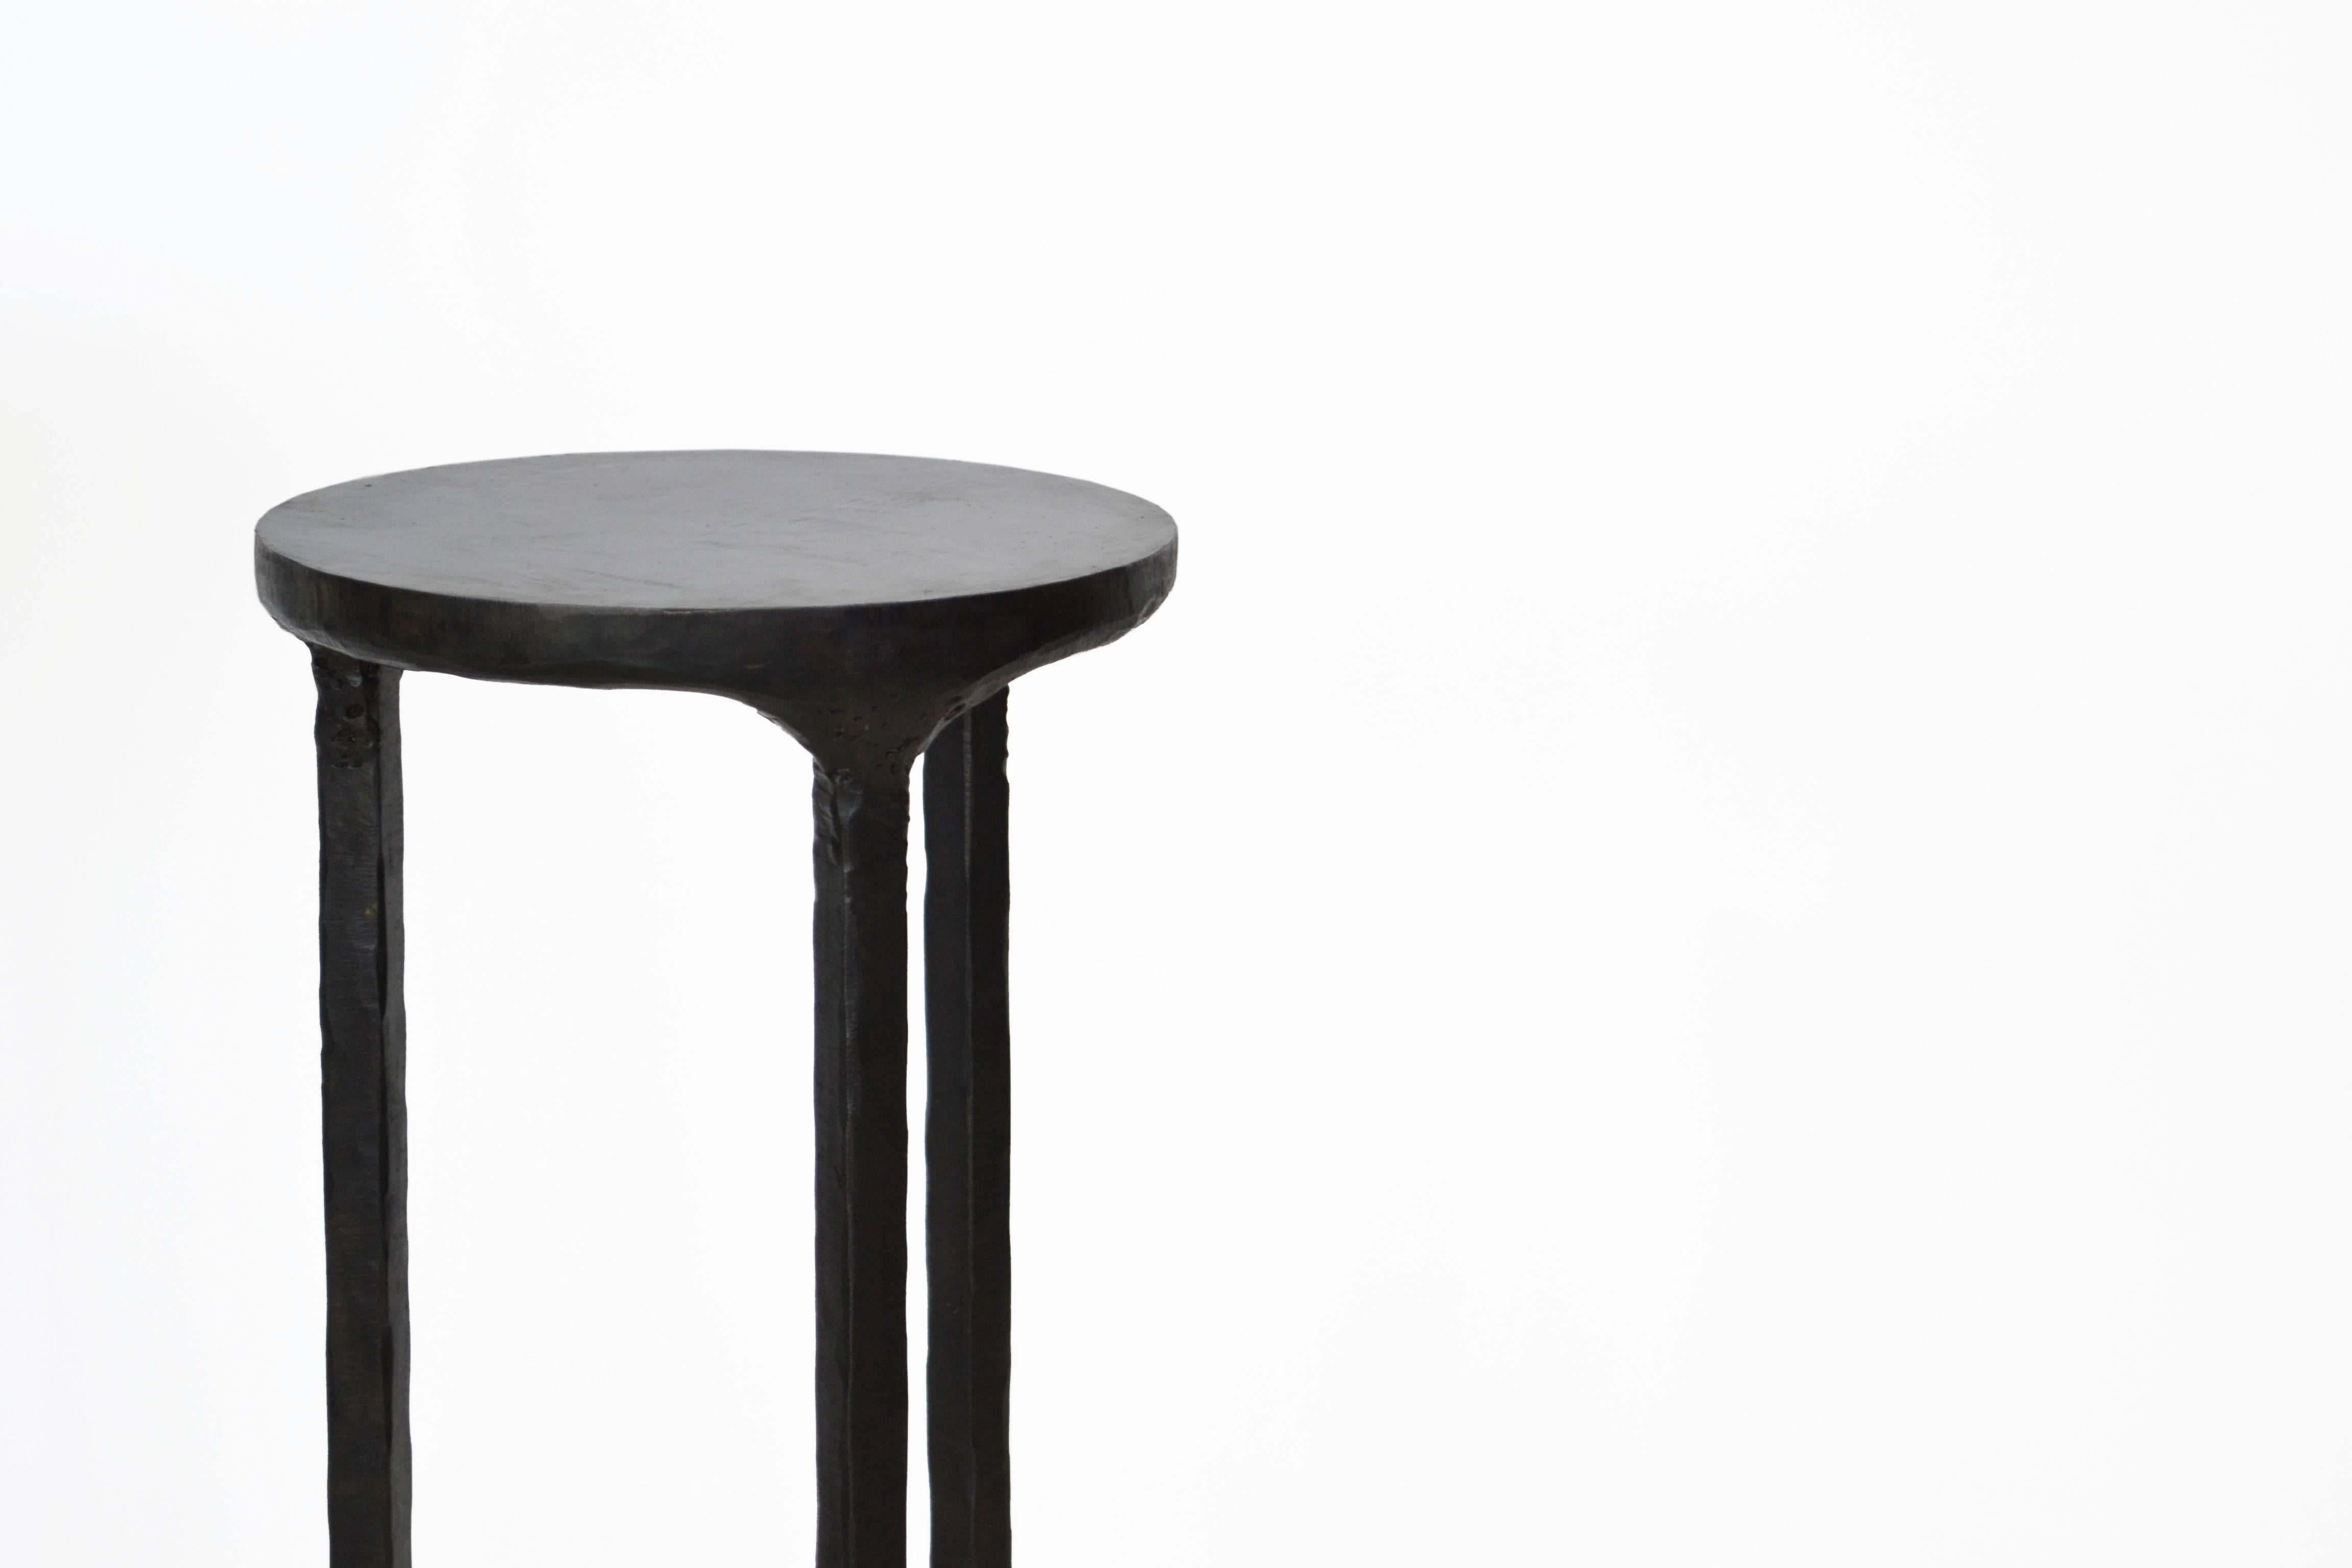 Américain Cocktail Table Pair Modern Hand-Shaped Round Handmade Blackened and Waxed Steel  en vente